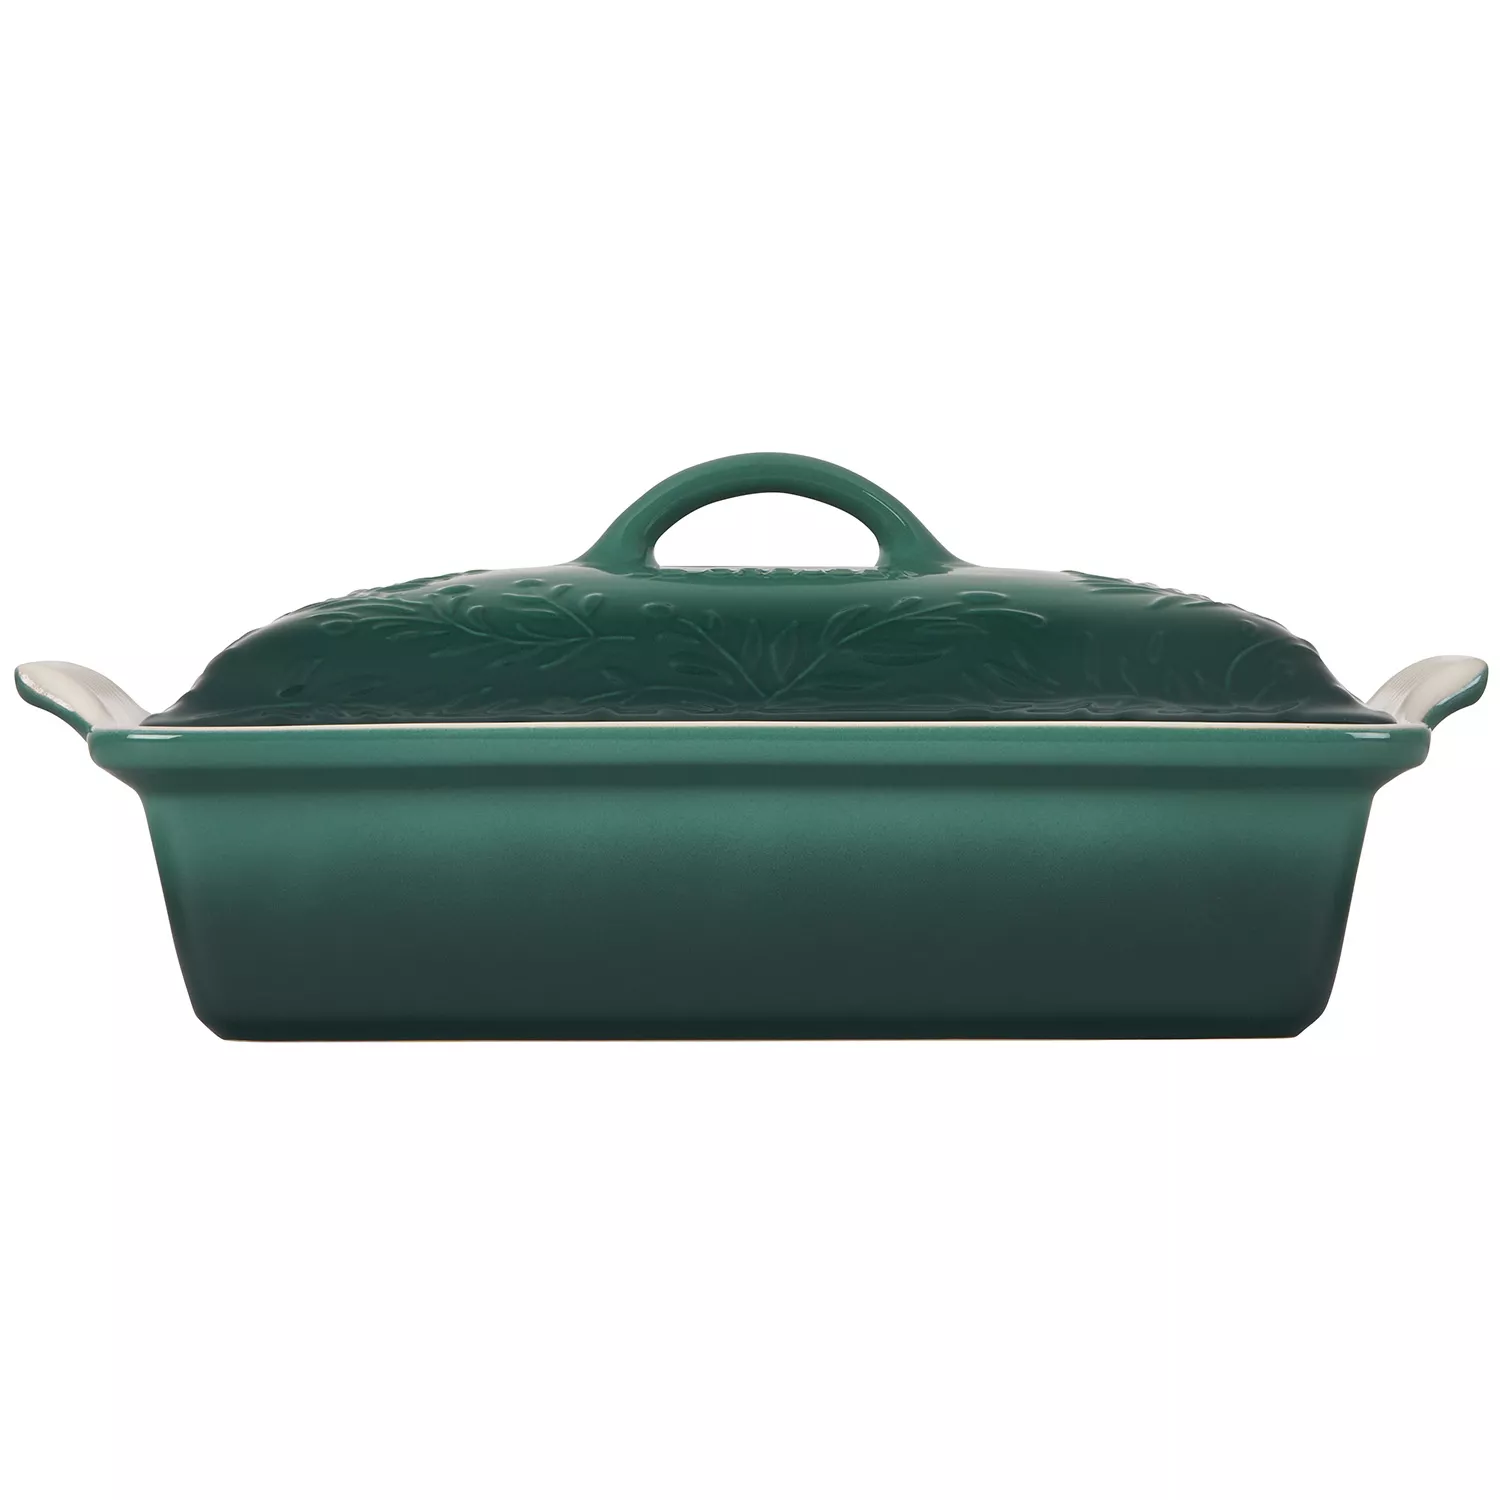 Le Creuset Olive Branch Heritage Rectangular Casserole with Lid, 12" x 9"